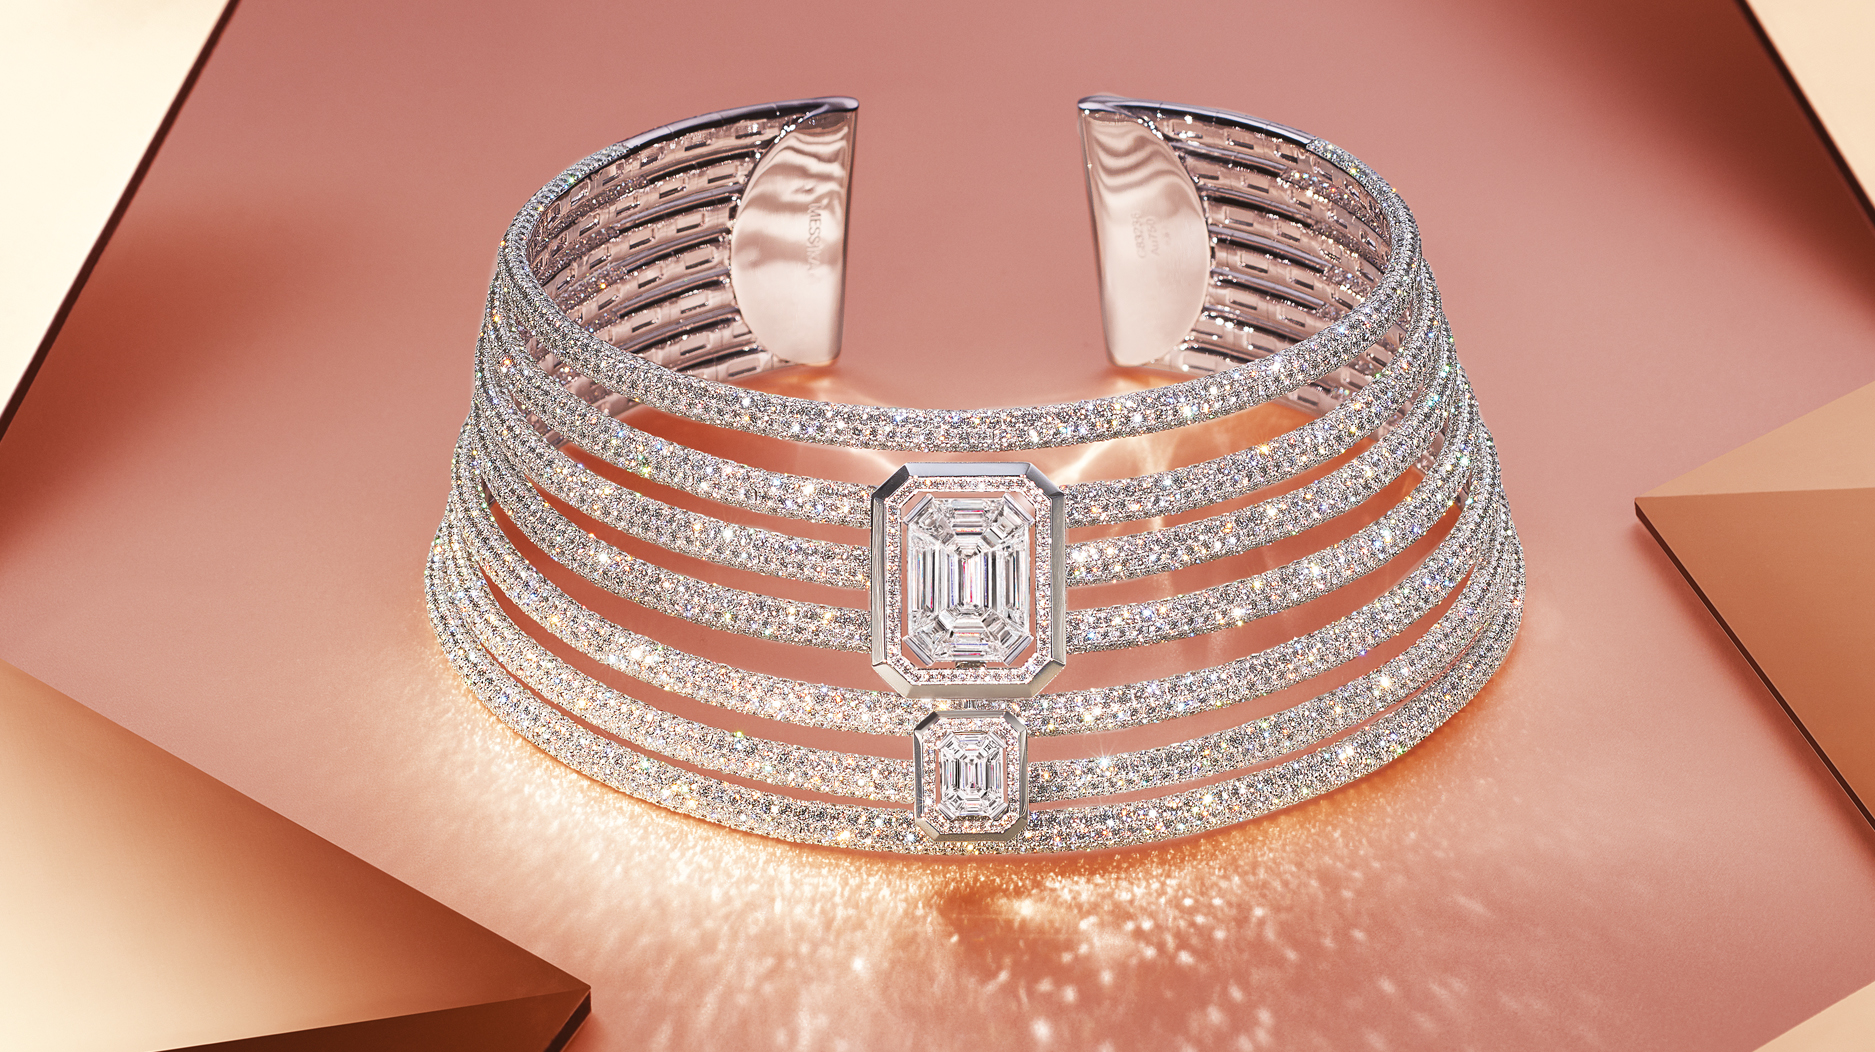 Graff, Cartier, and more: 8 most spectacular transformable jewellery pieces